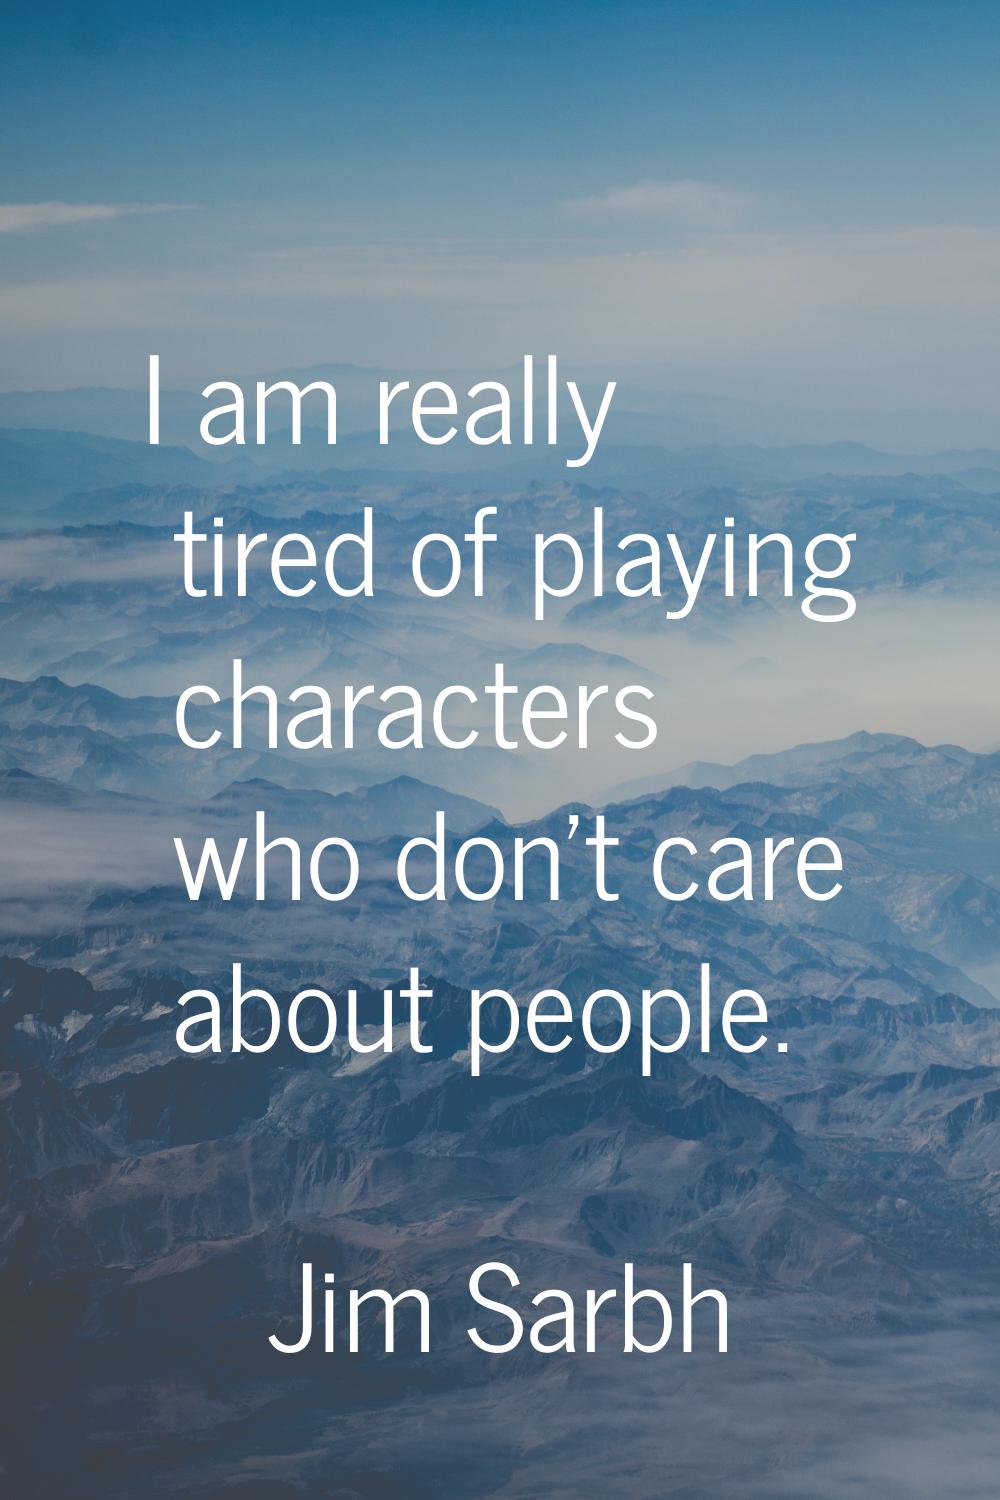 I am really tired of playing characters who don't care about people.